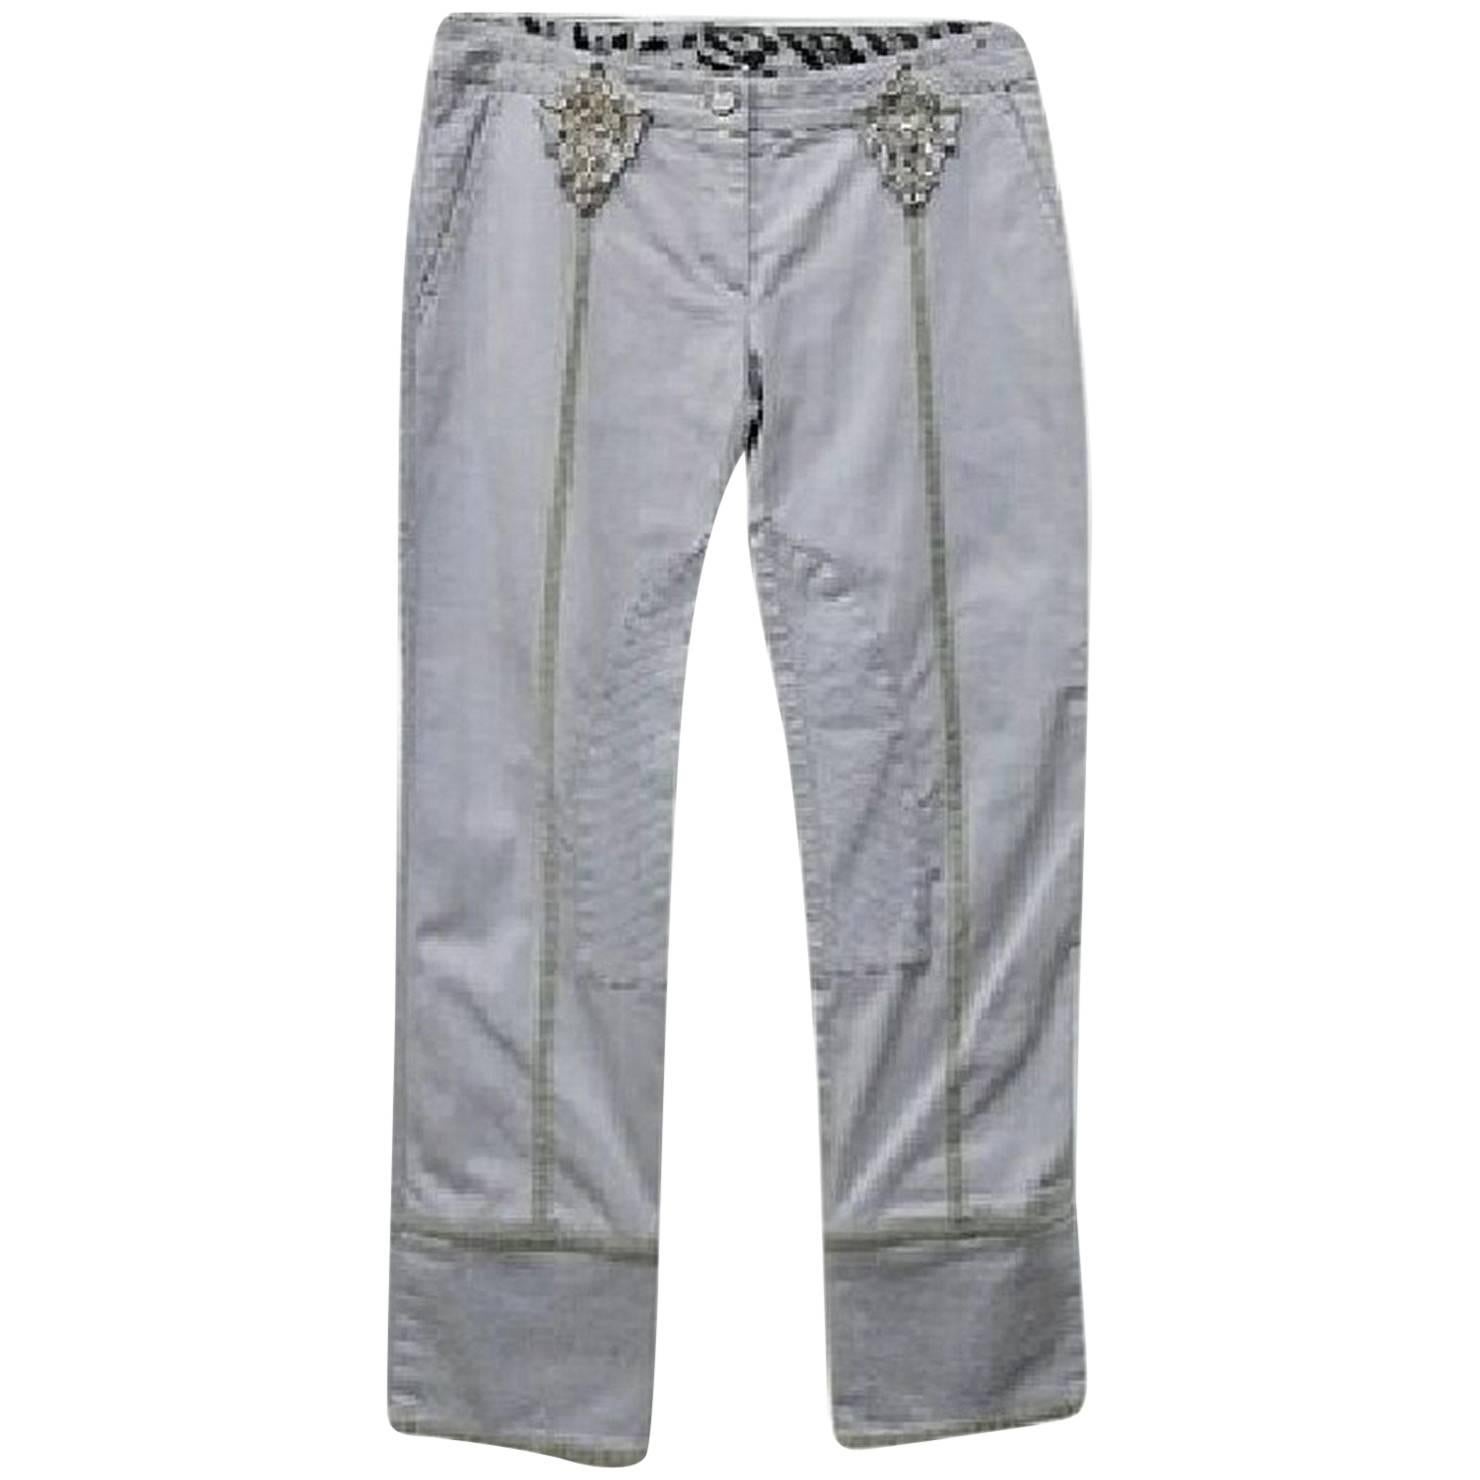 Roberto Cavalli Class Ankle Trousers Pants - Size: 8 (M, 29, 30) For Sale